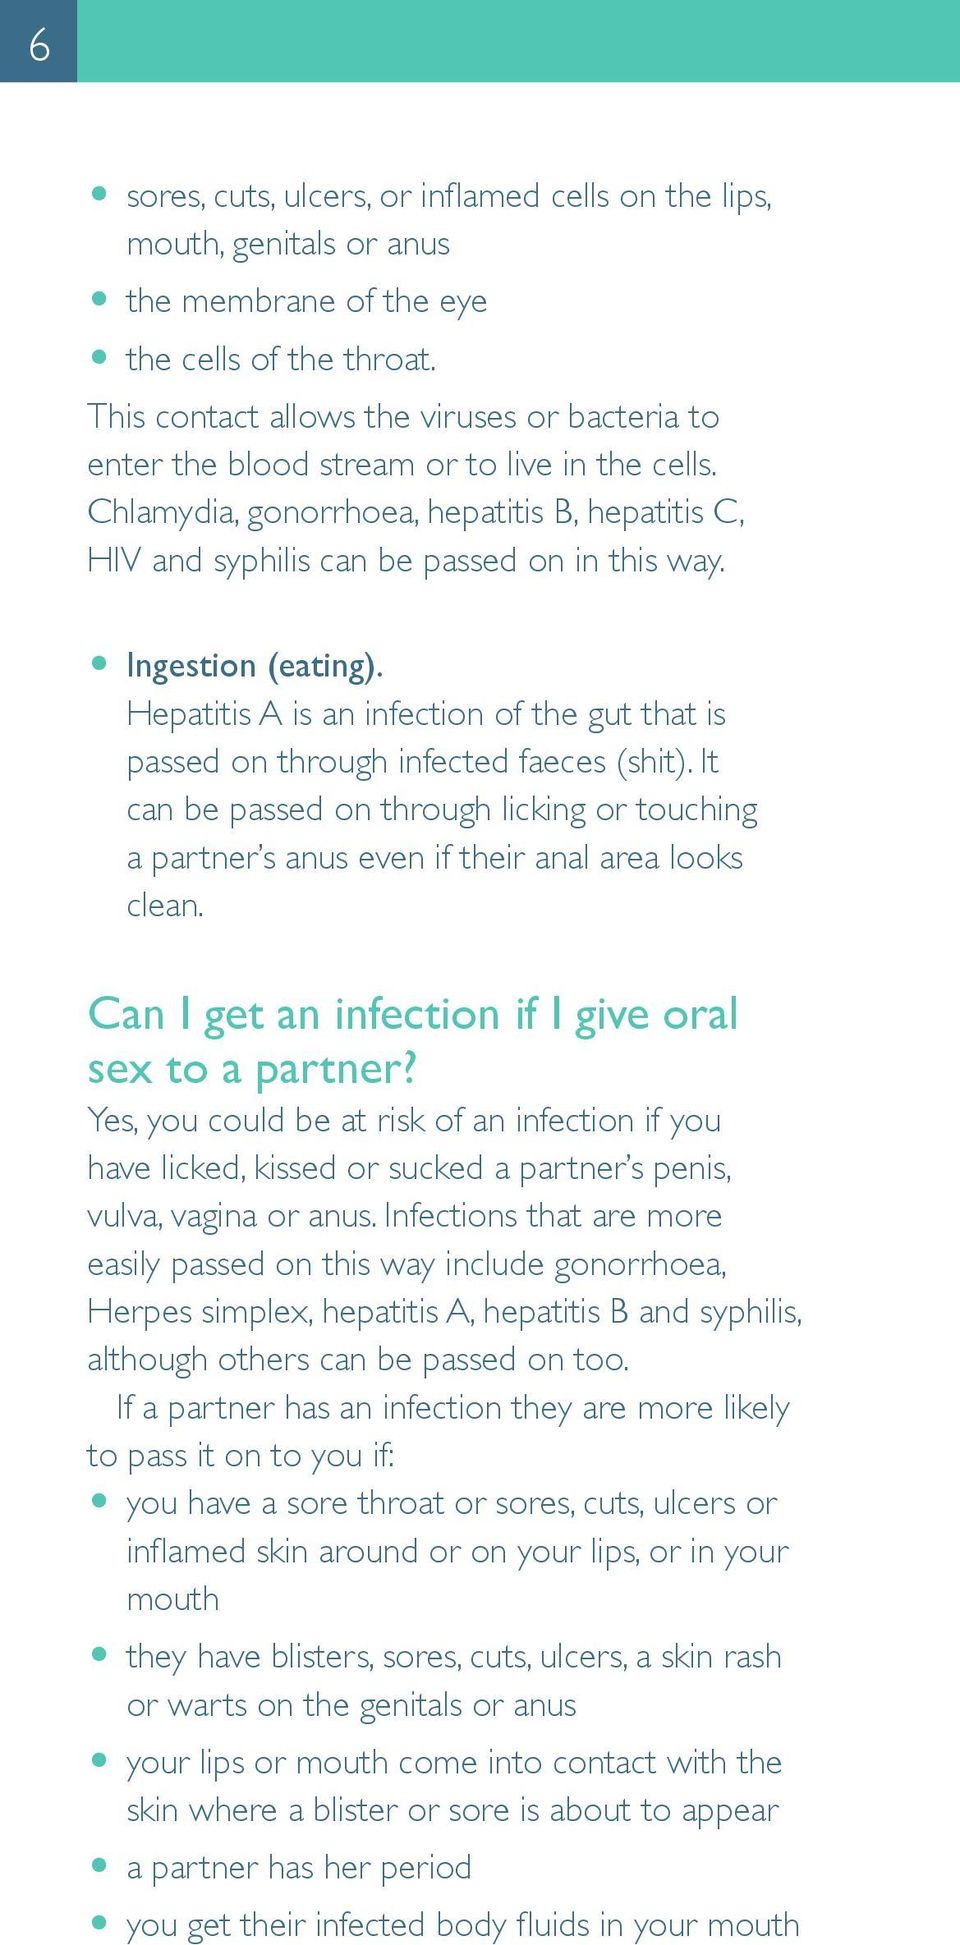 O Ingestion (eating). Hepatitis A is an infection of the gut that is passed on through infected faeces (shit).